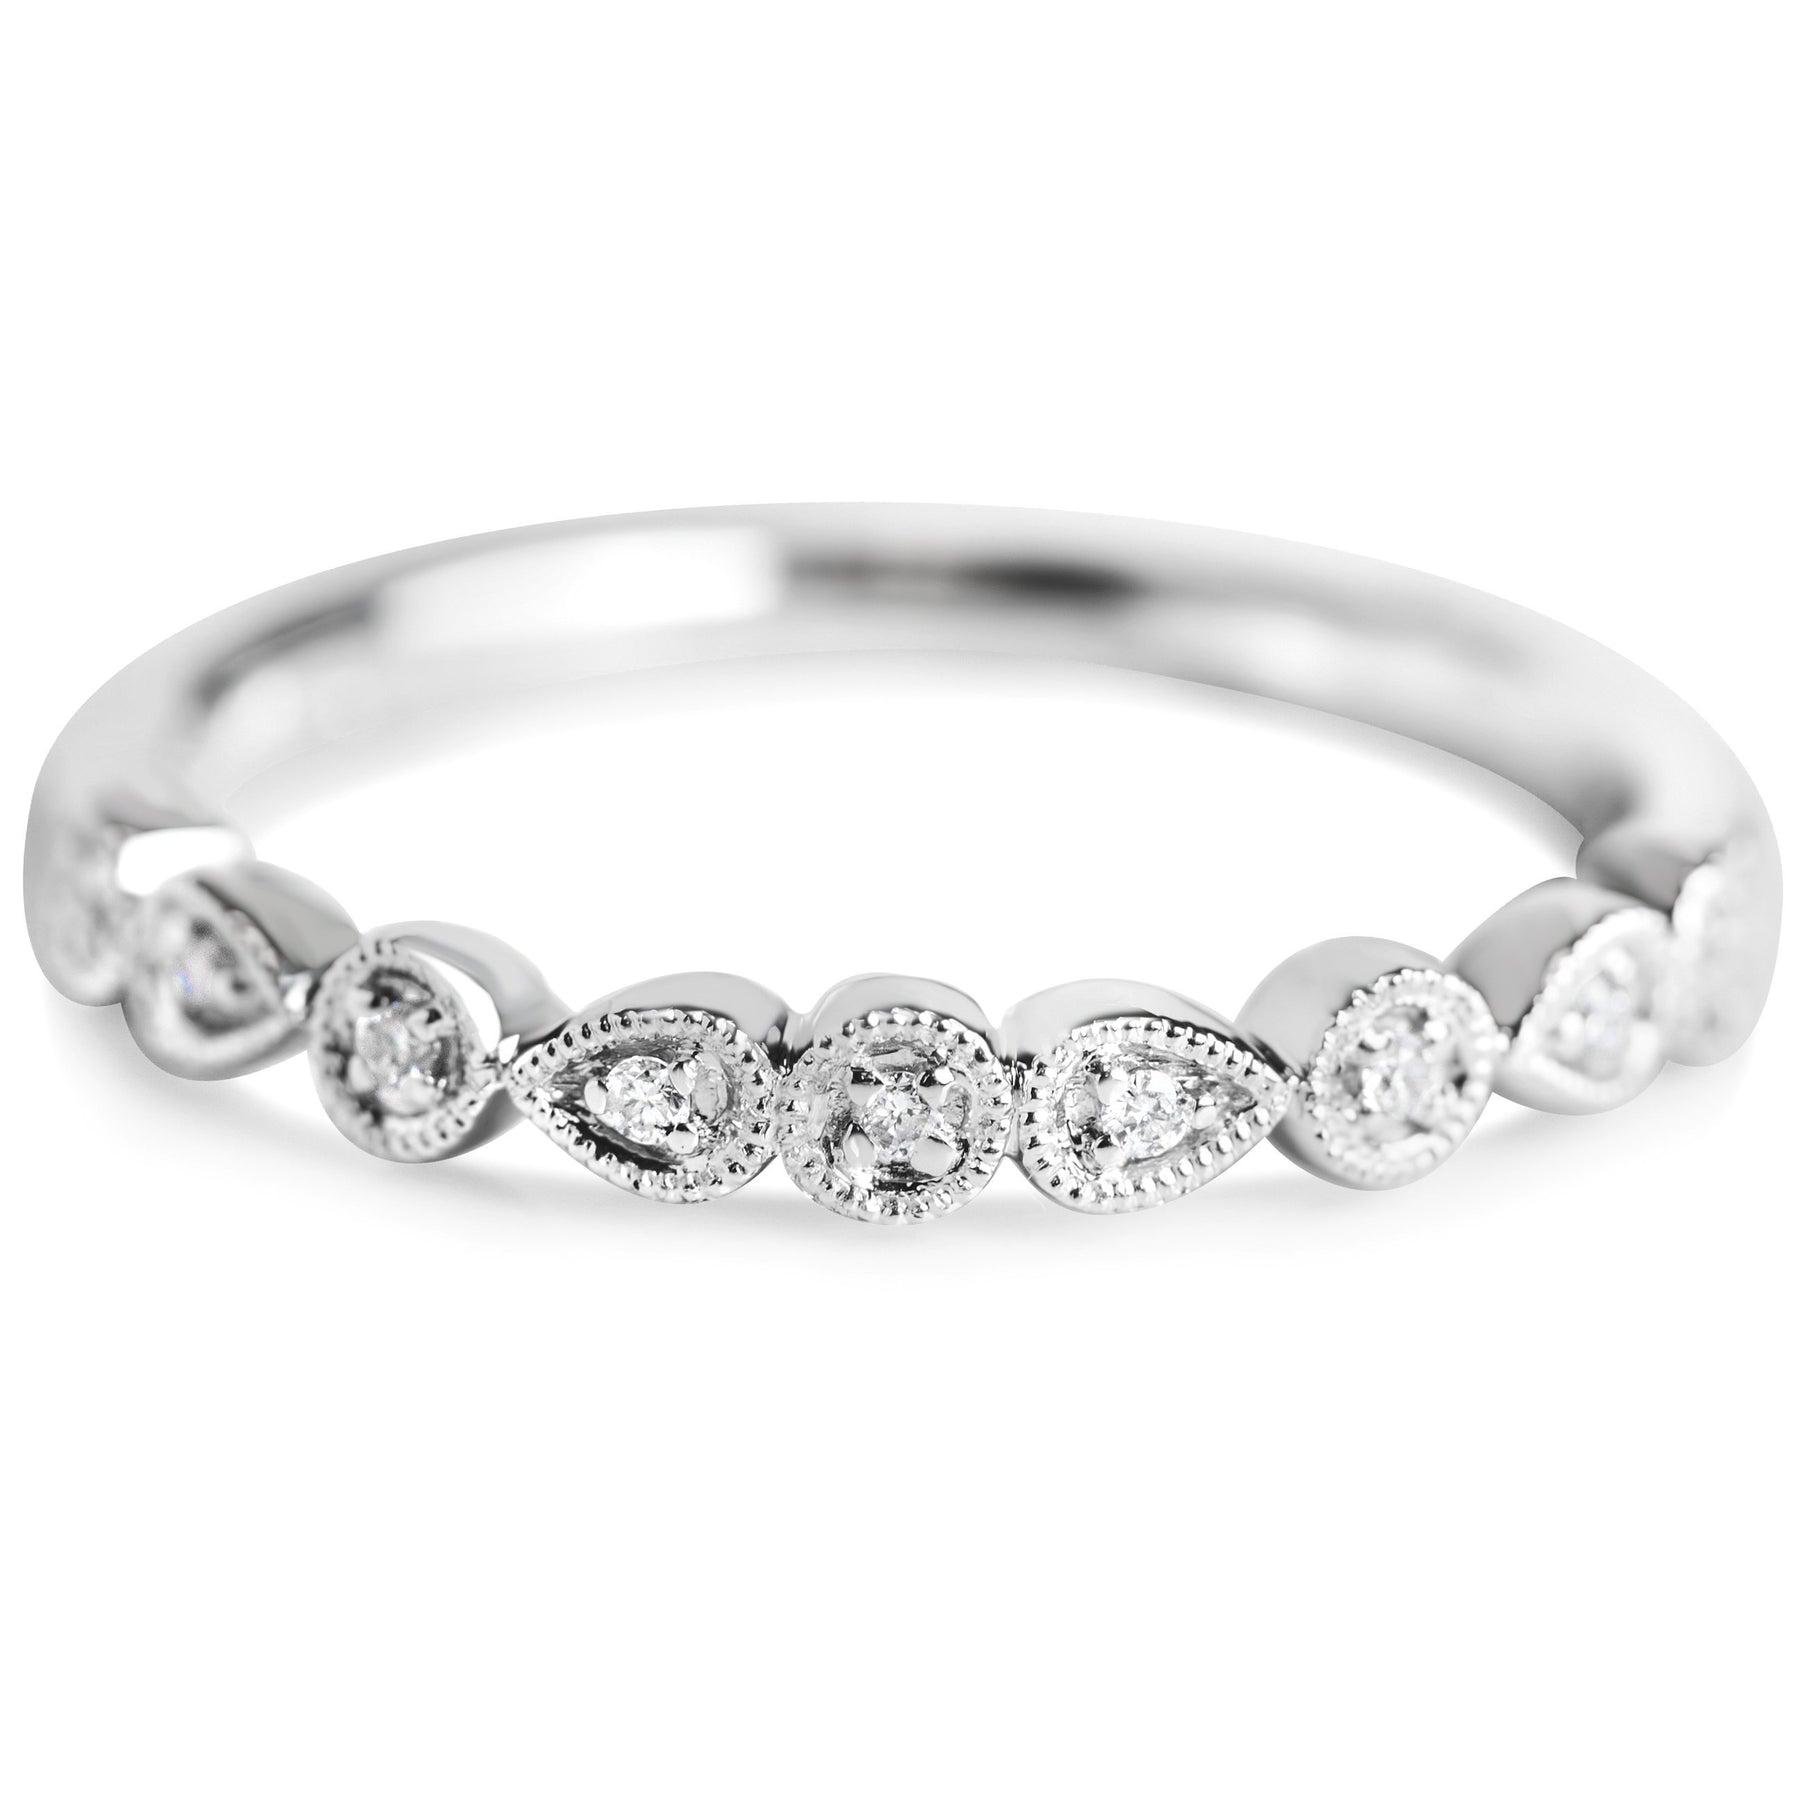 white gold diamond wedding band or stack ring with milgrain details